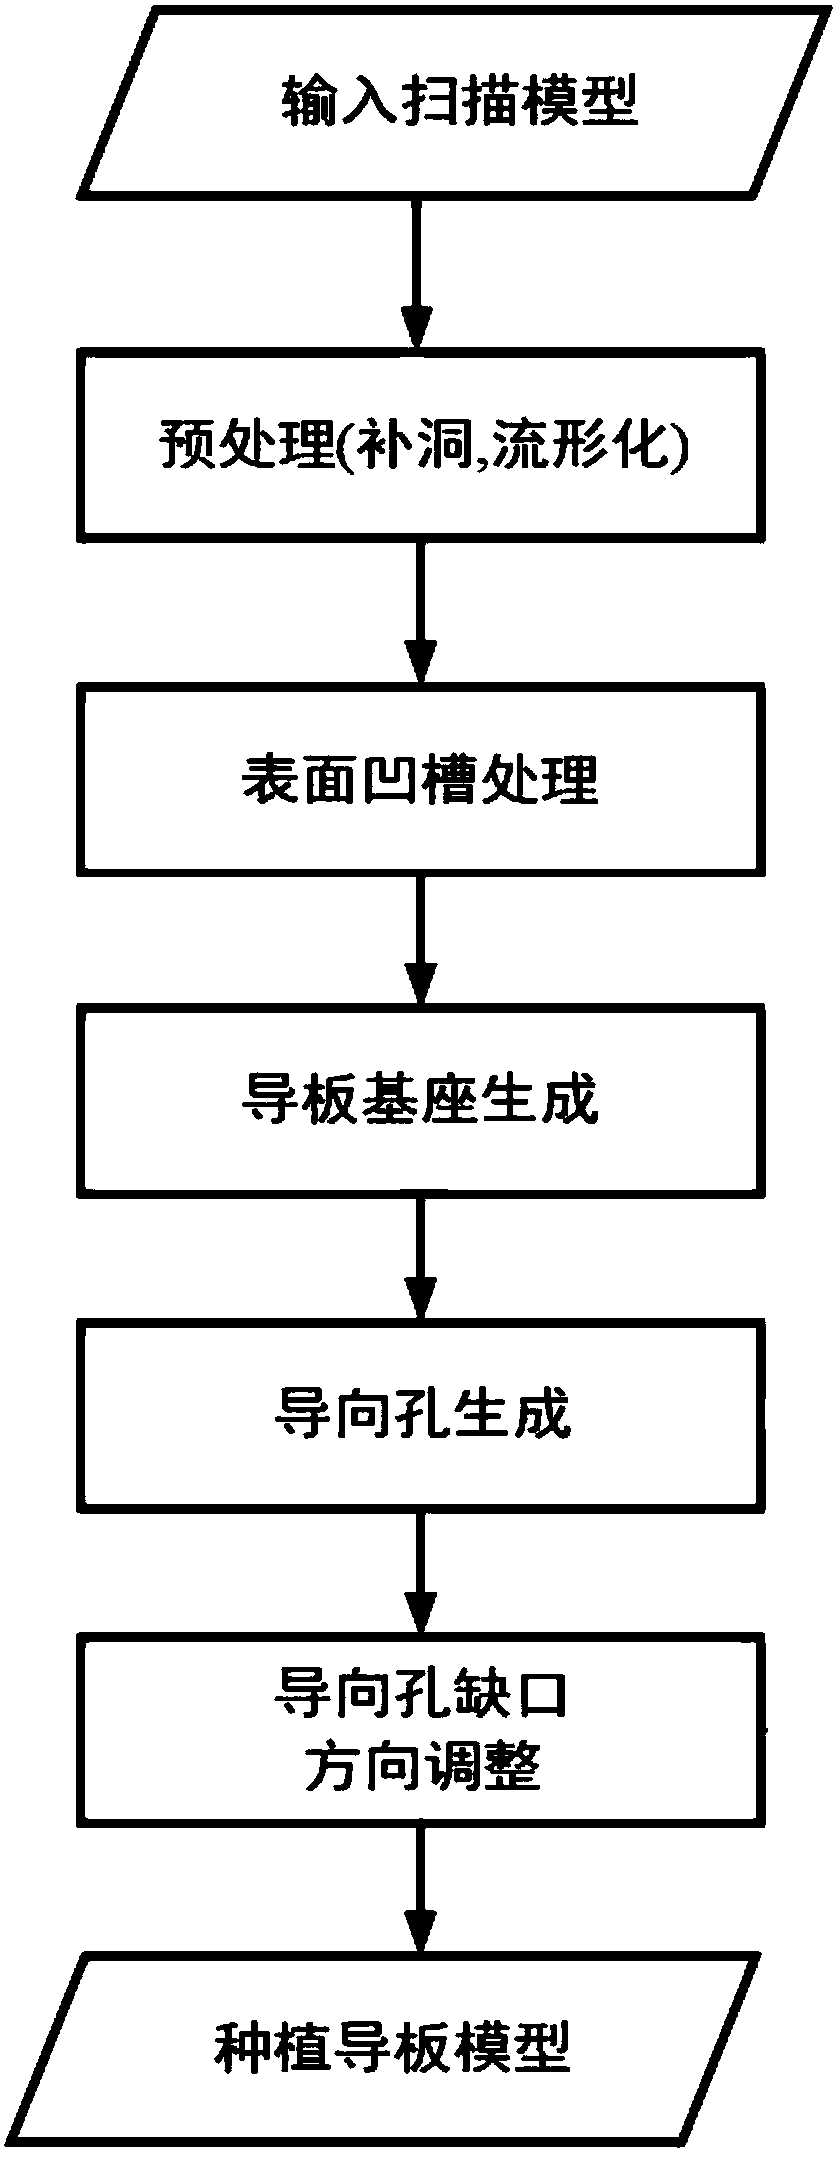 Full-automatic implanting guide plate production method